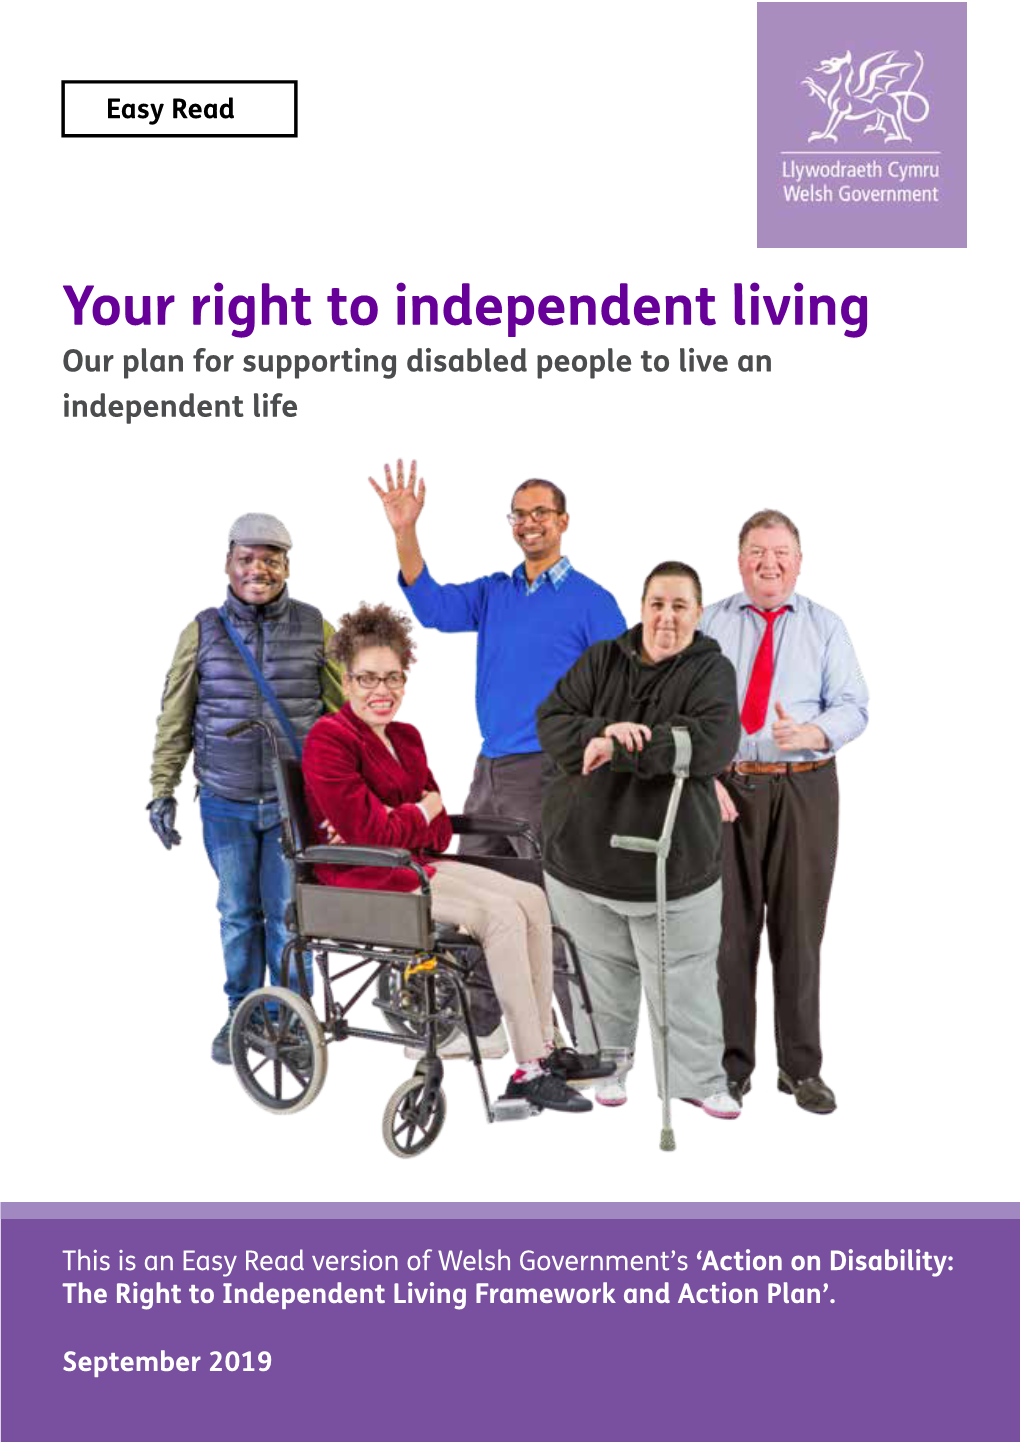 The Right to Independent Living Framework and Action Plan’